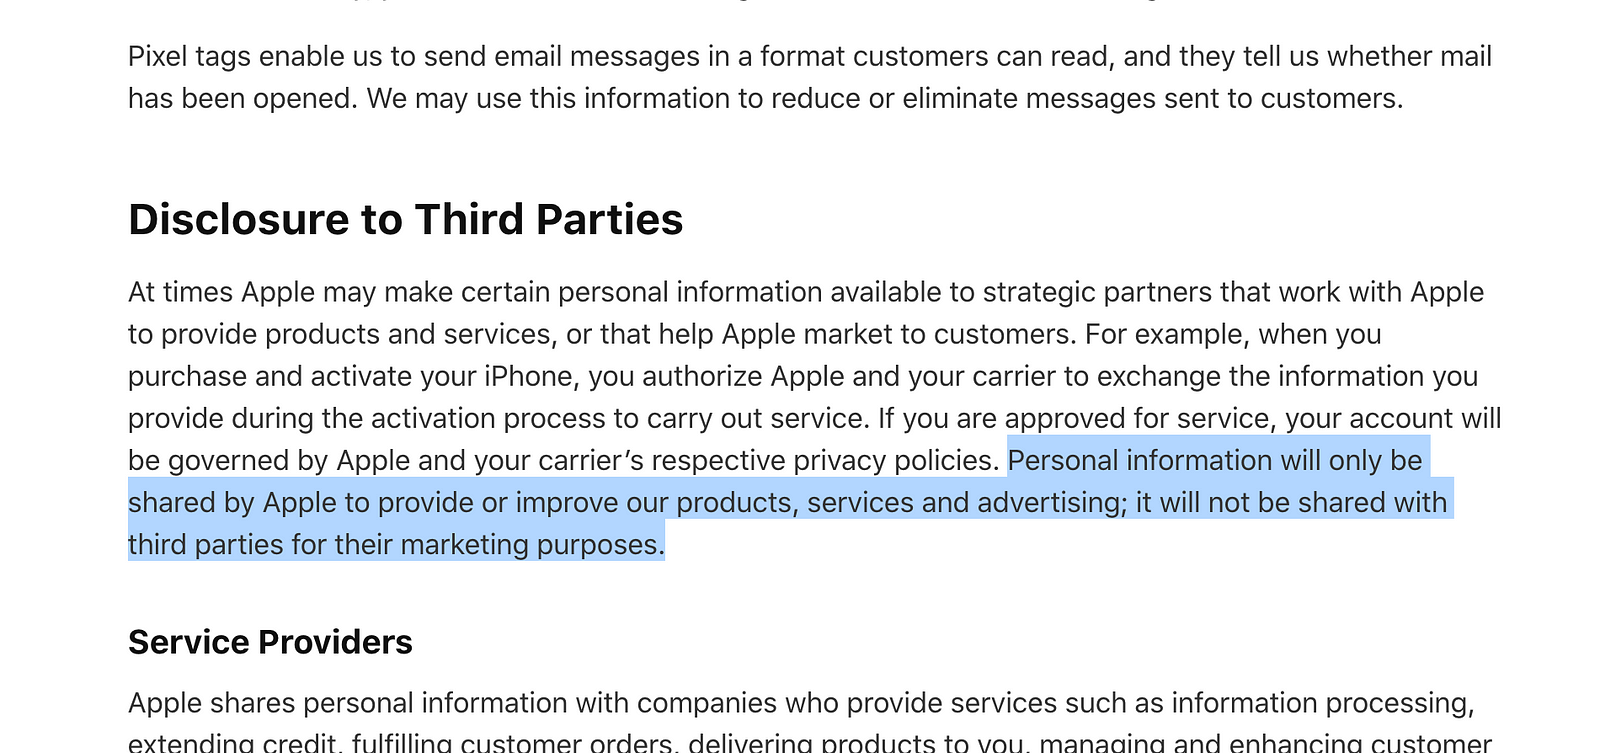 Apple's Privacy Policy